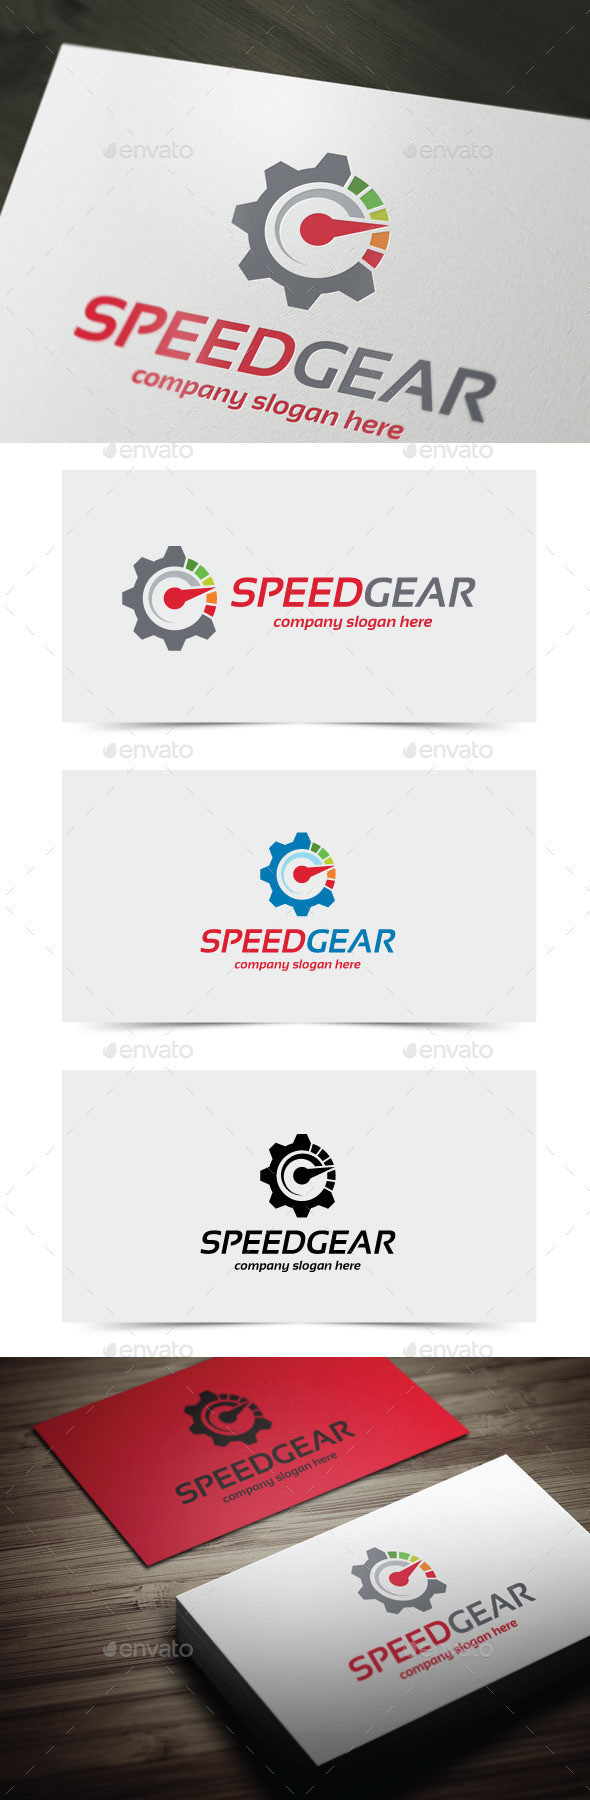 Speed gear preview